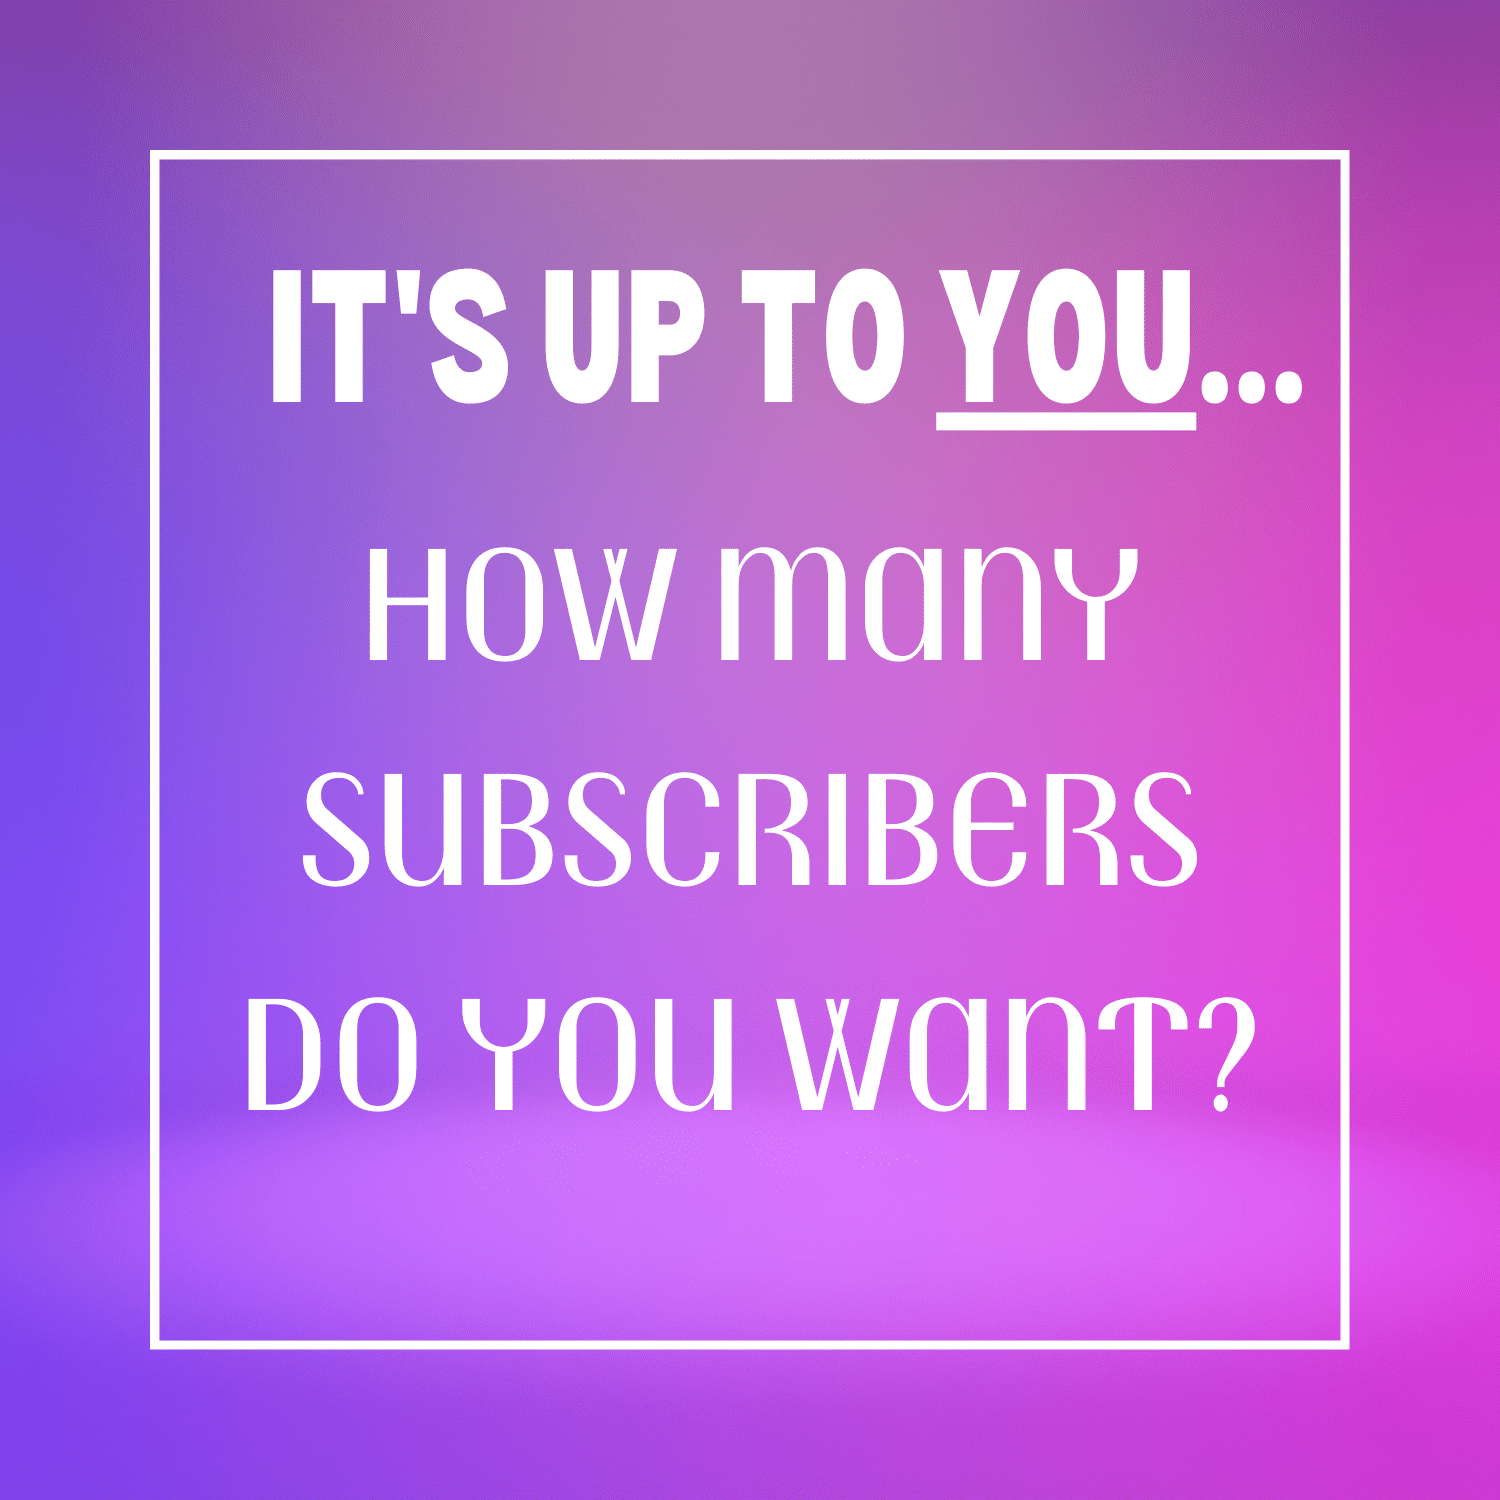 It's up to you. How many subscribers do you want?